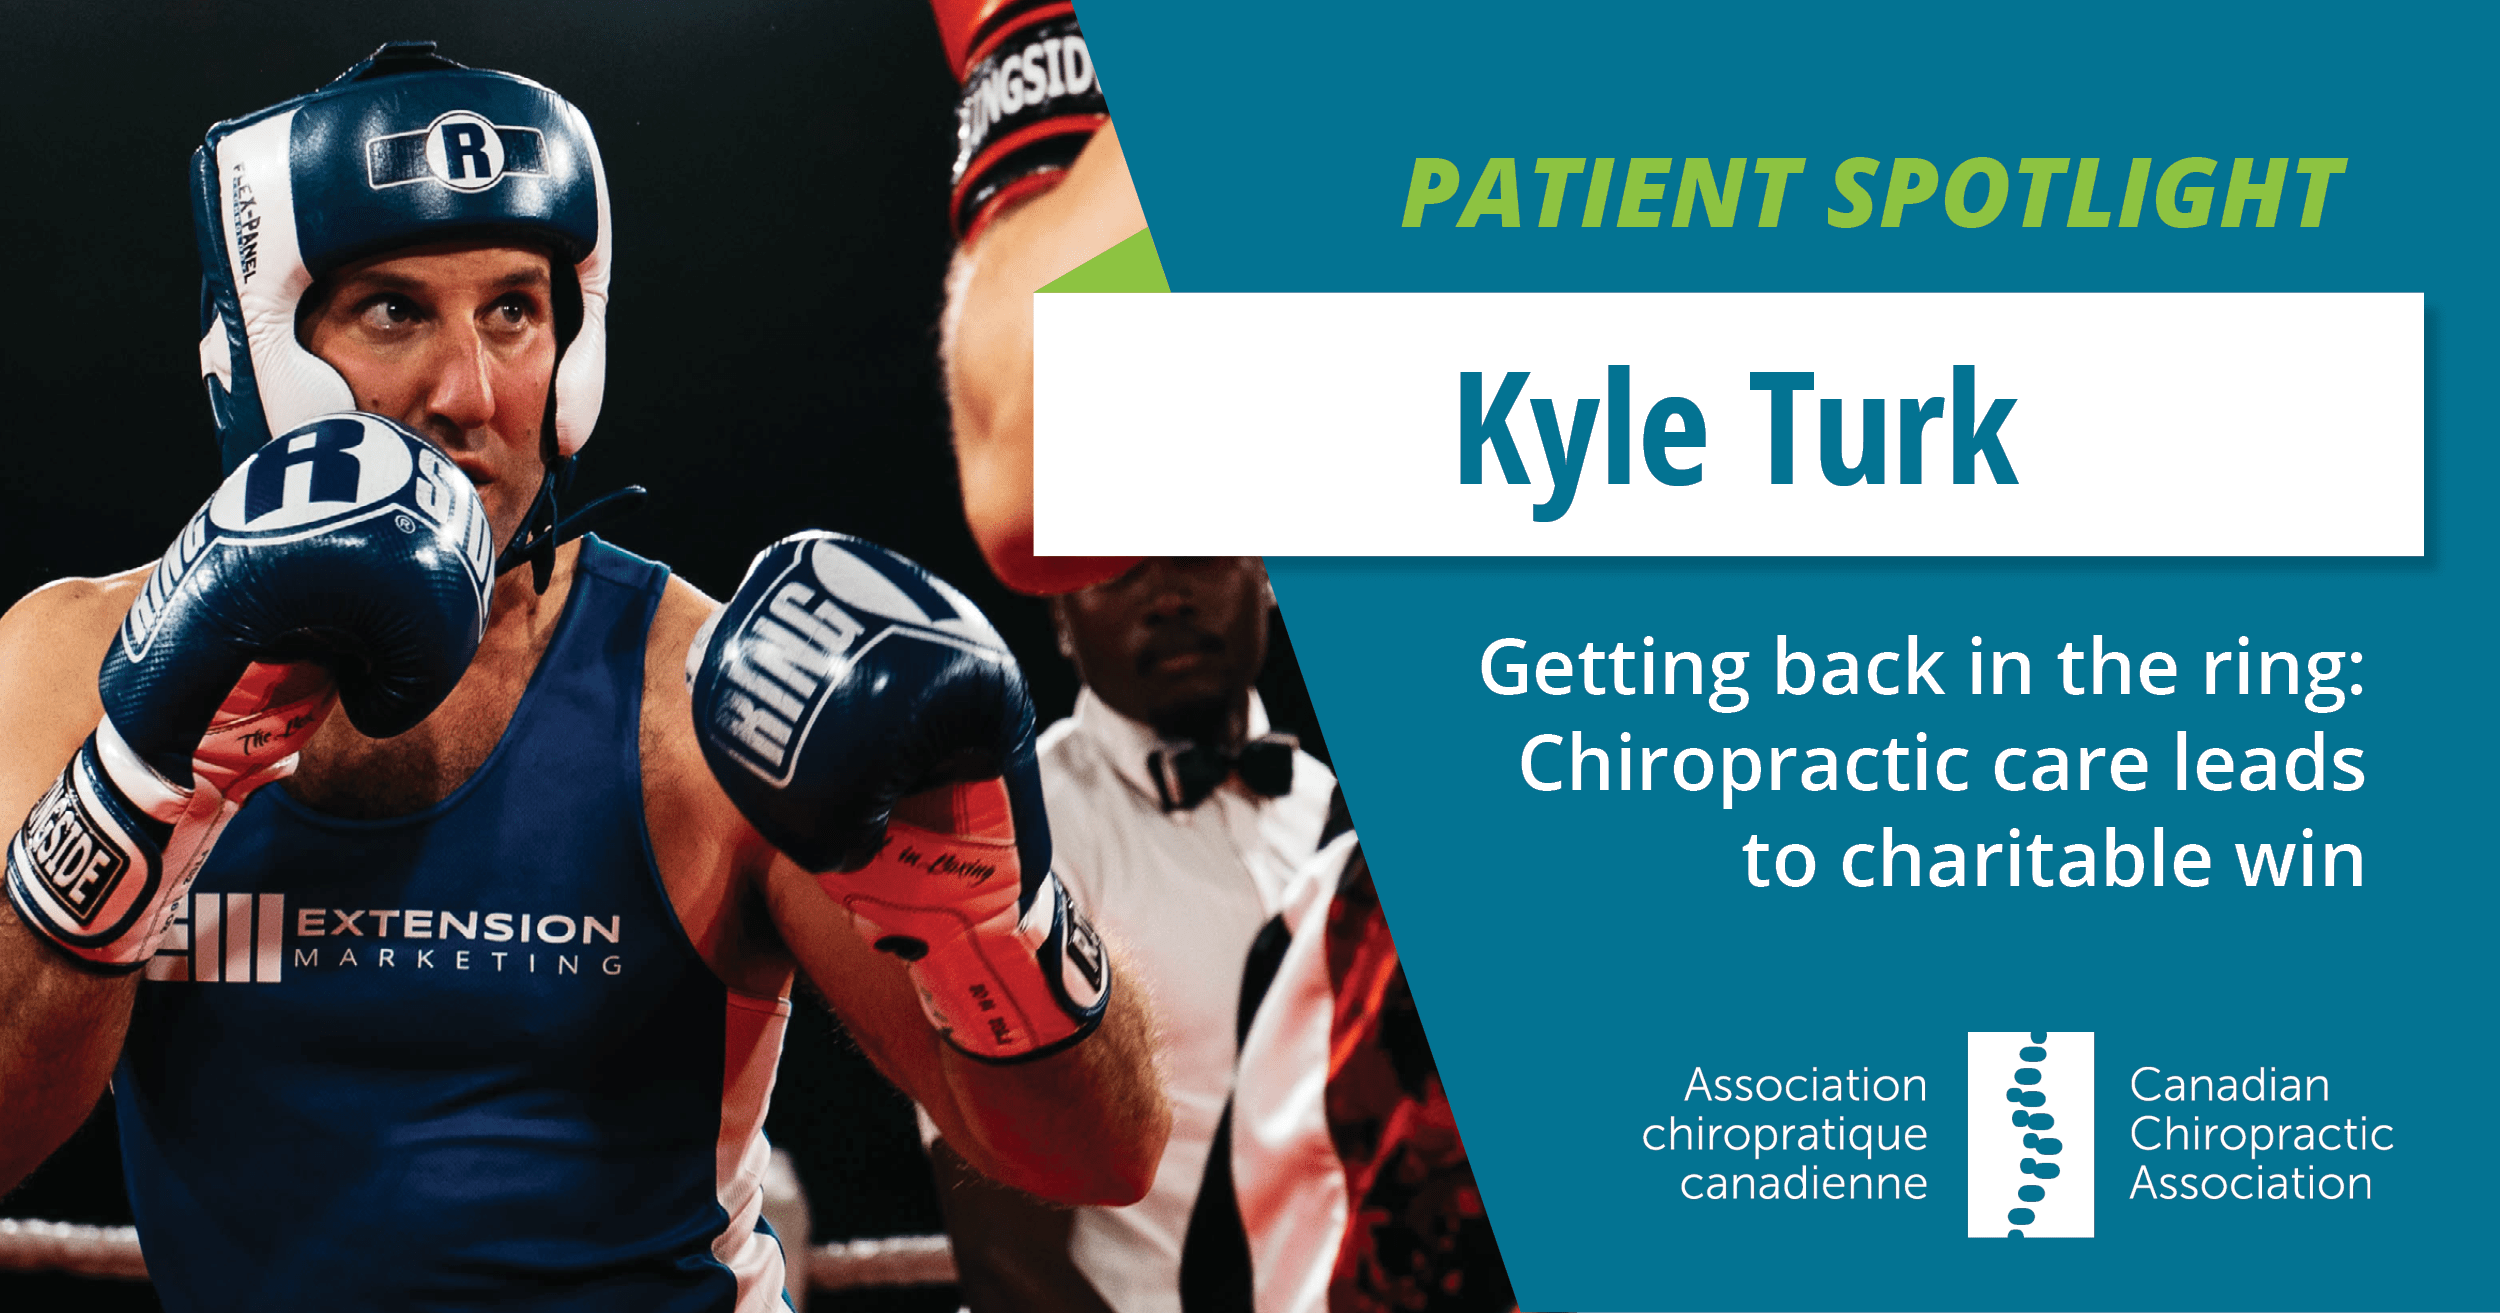 Kyle Turk: Getting back in the ring: Chiropractic care leads to charitable win